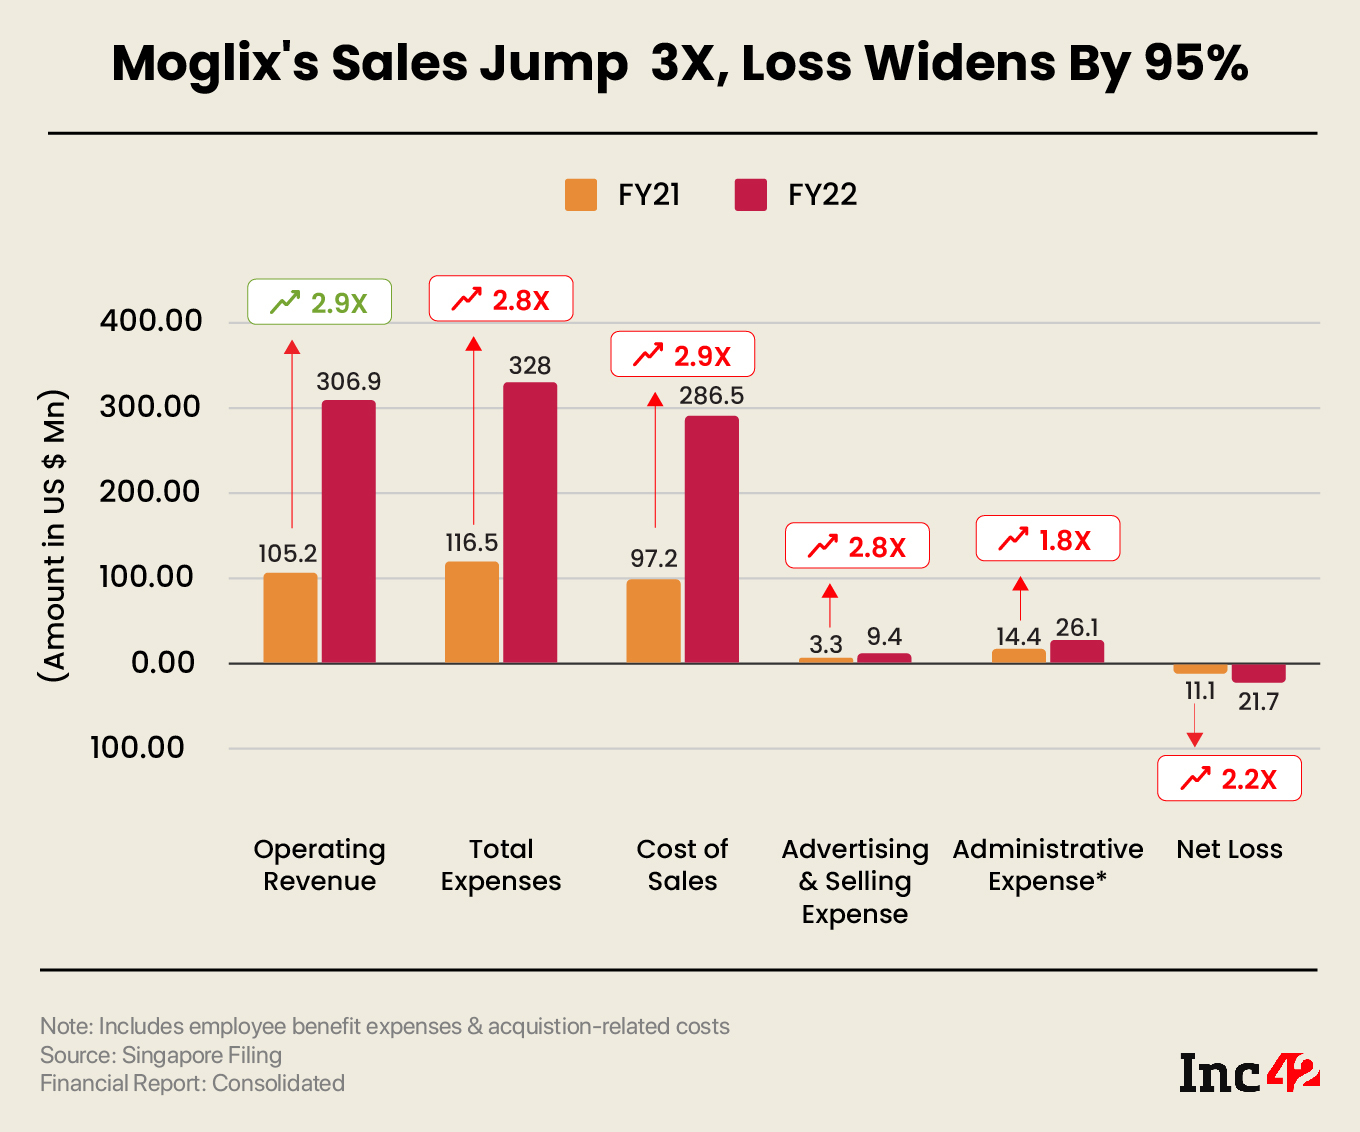 Moglix’s EBITDA margin improved to -5.9% in FY22 from -9.96% in FY21, while net loss widened 95% to $21.7 Mn in FY22 from $11.1 Mn in FY21